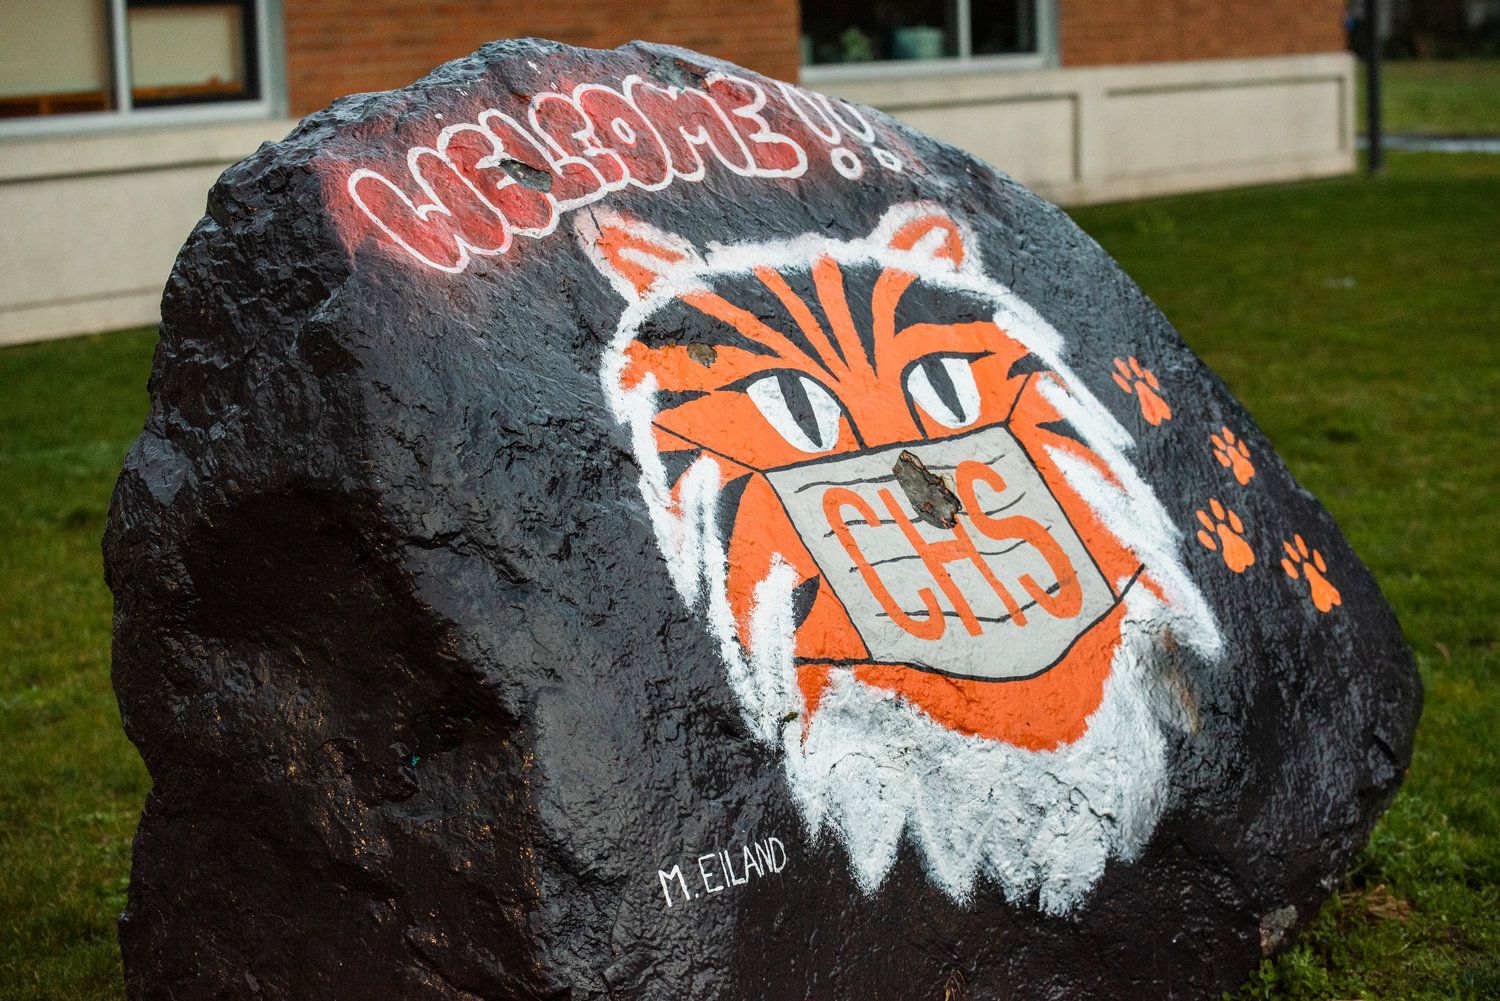 A rock on display outside Centralia High School last March.